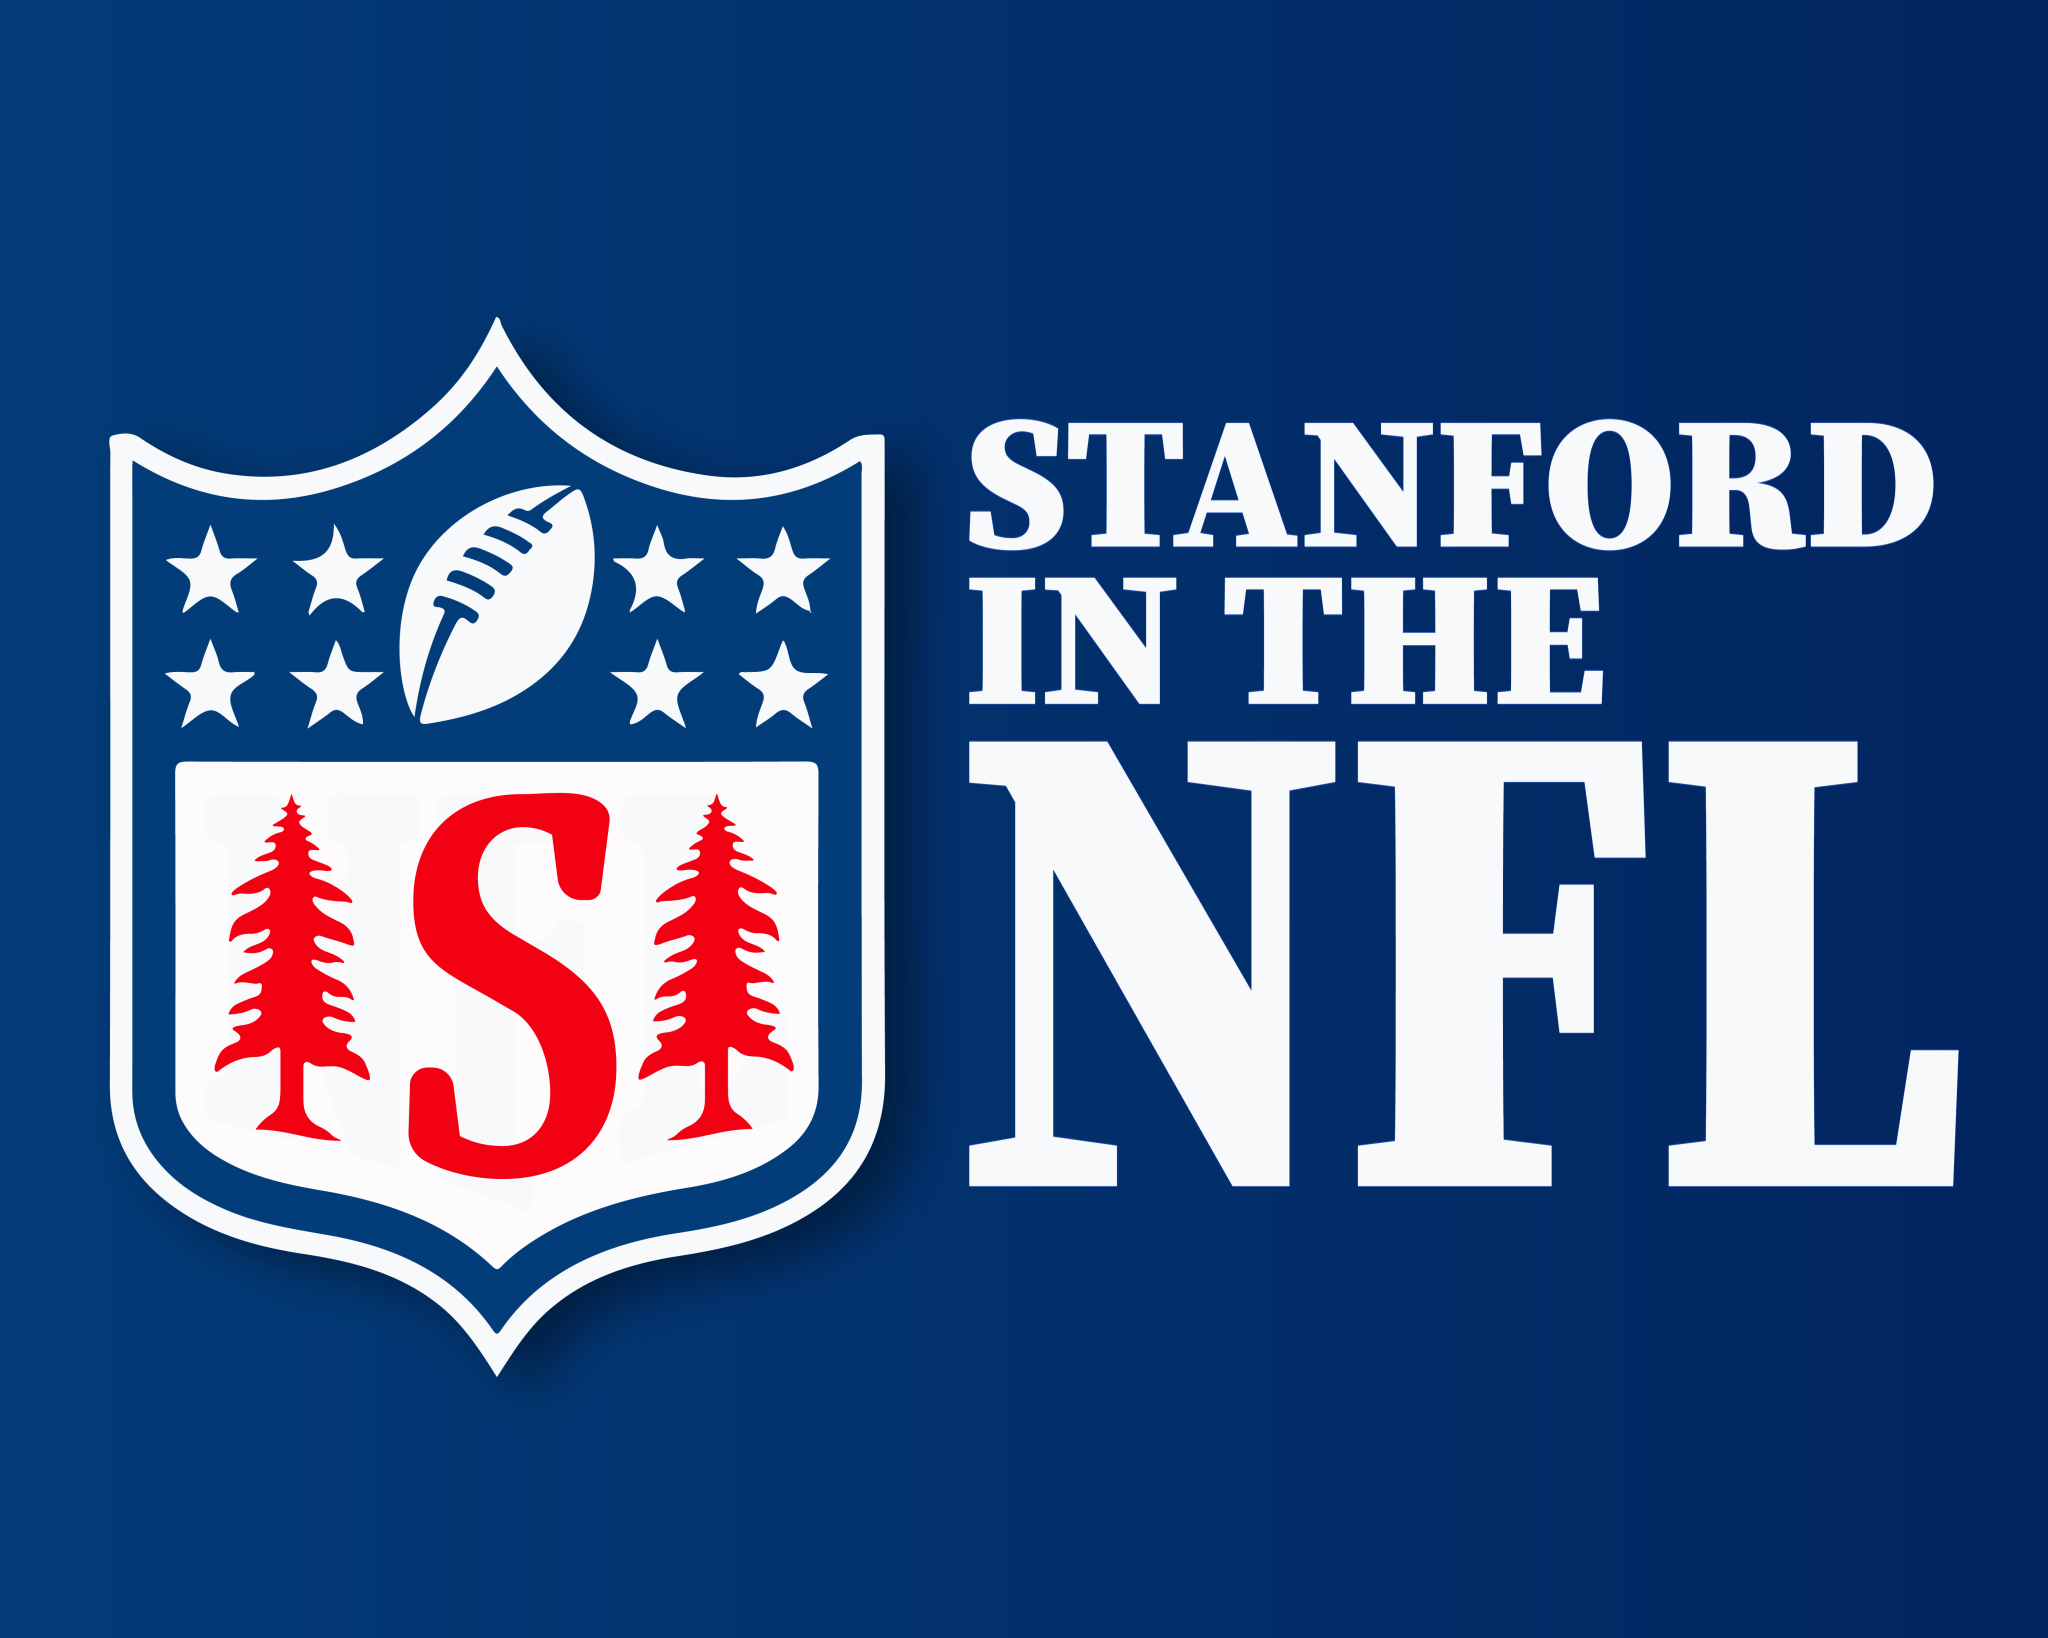 Stanford vs. Cal Who has produced the greatest NFL players?